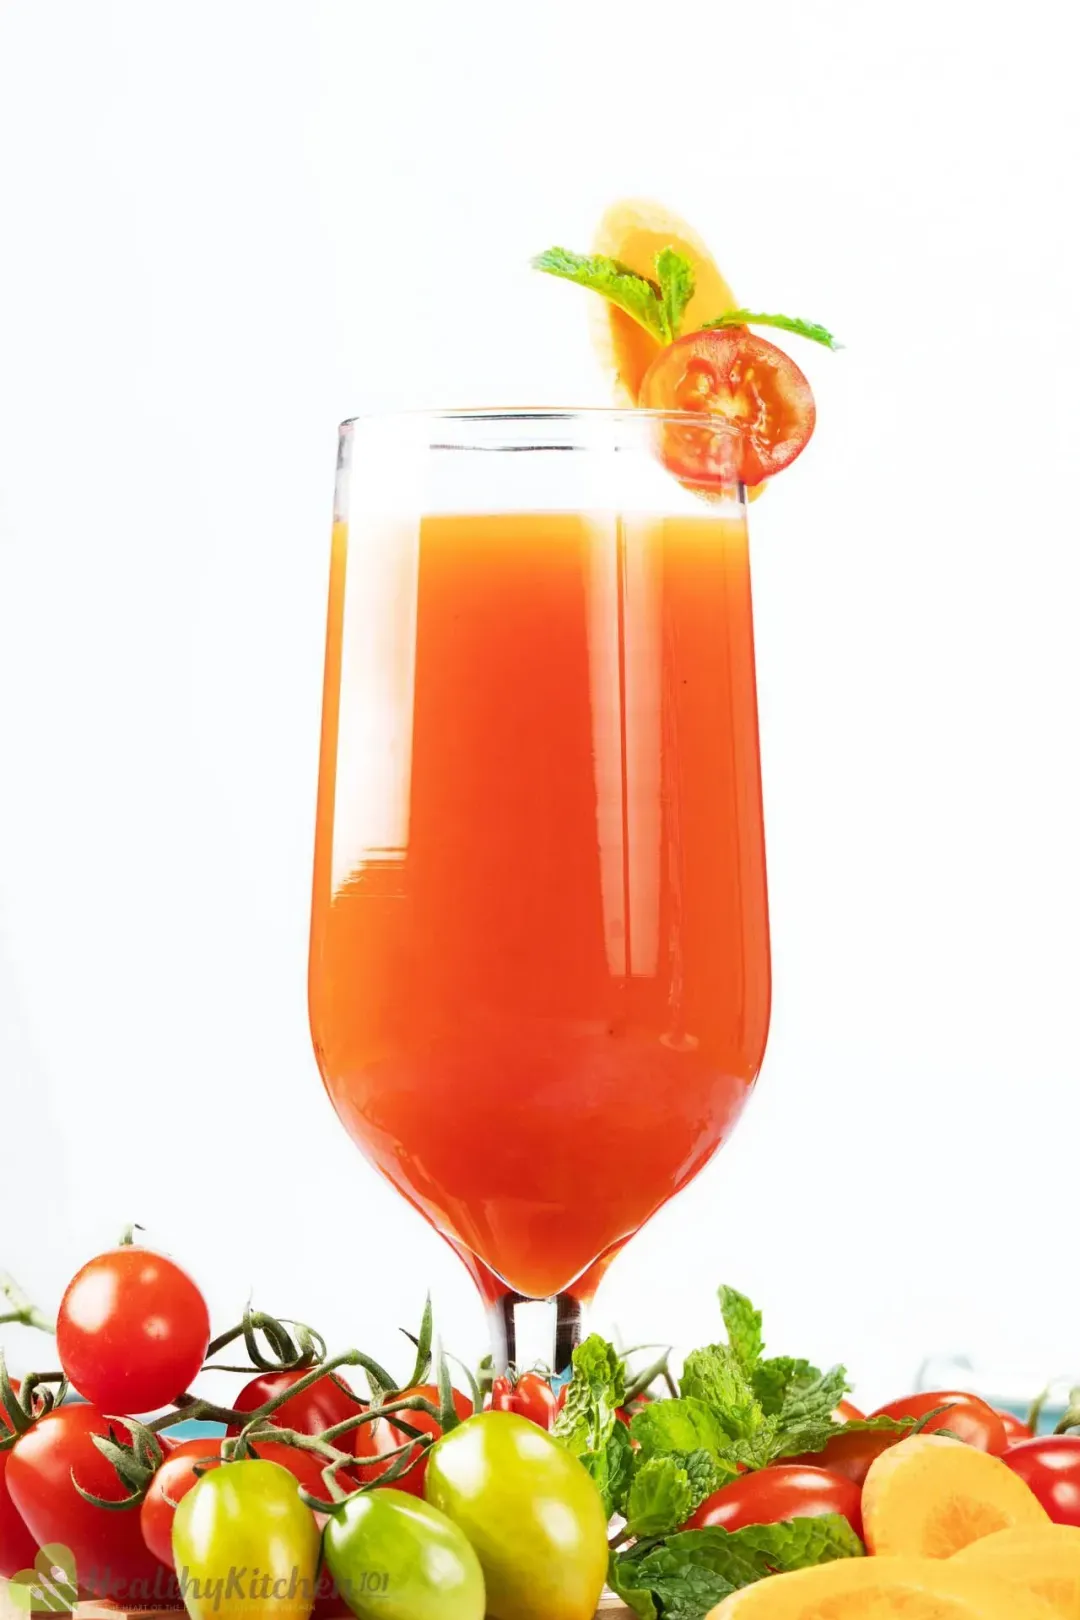 A glass of orange and tomato juice surrounded by cherry tomatoes of different colors